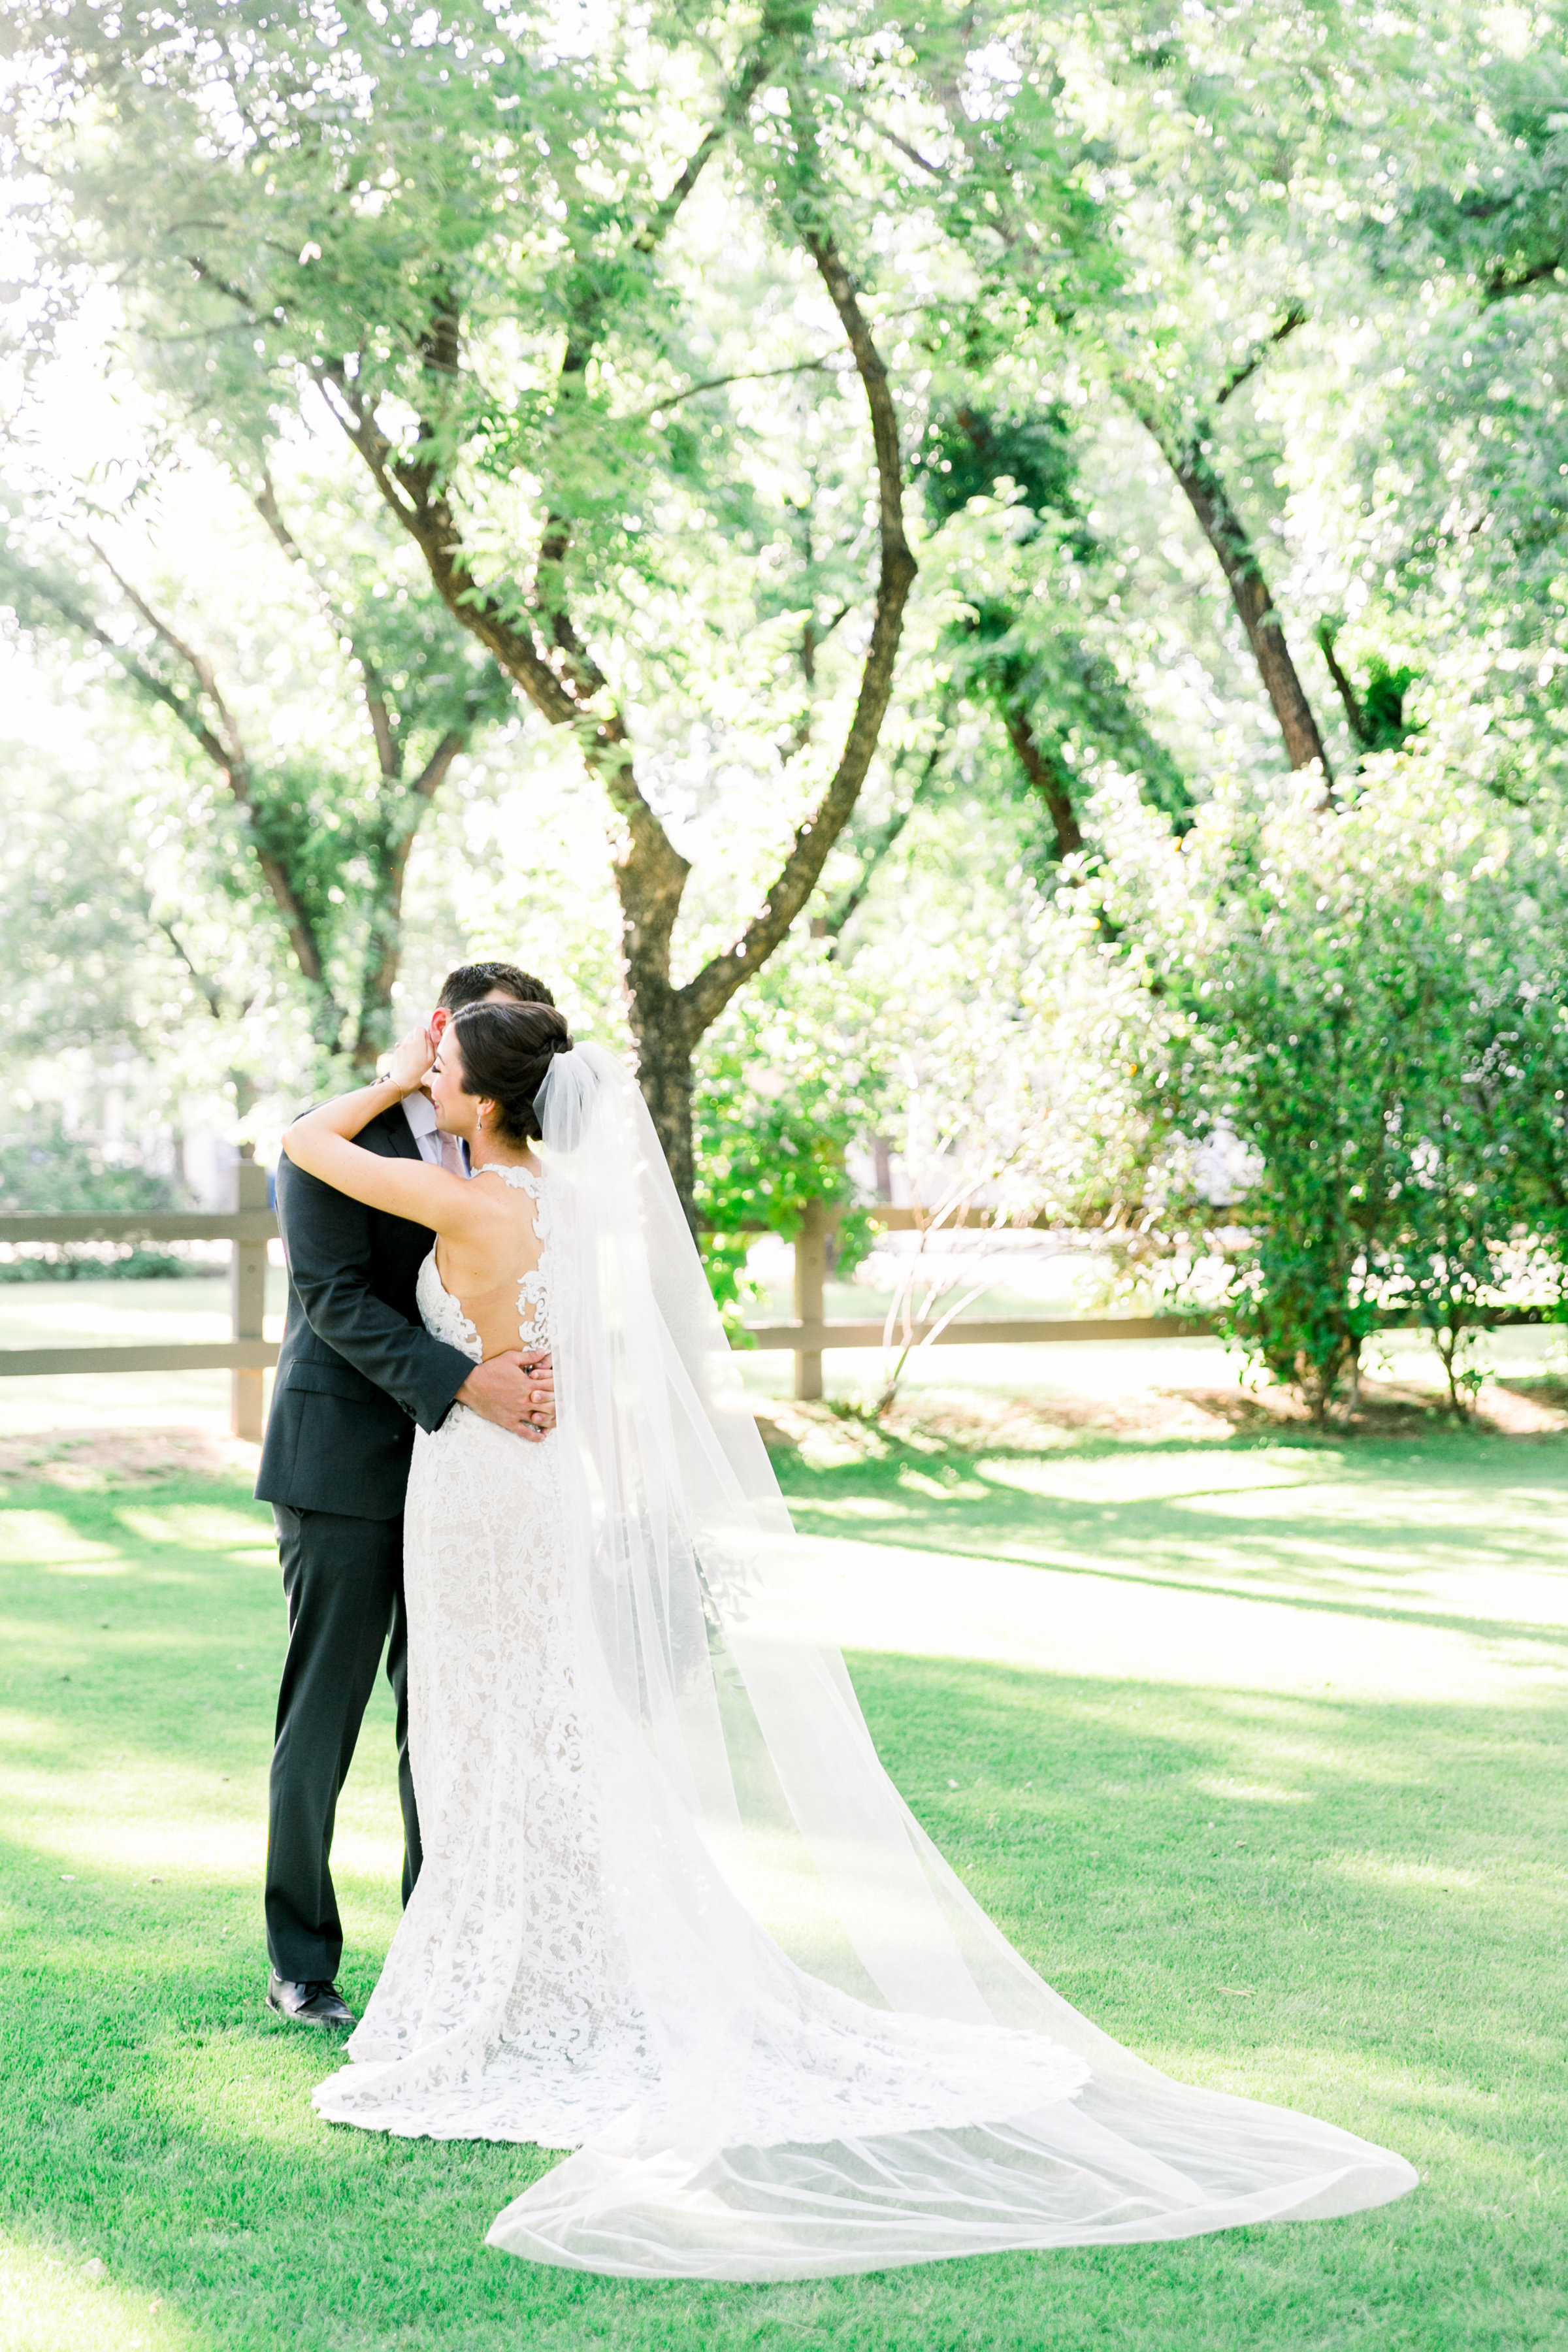 Karlie Colleen Photography - Venue At The Grove - Arizona Wedding - Maggie & Grant -60